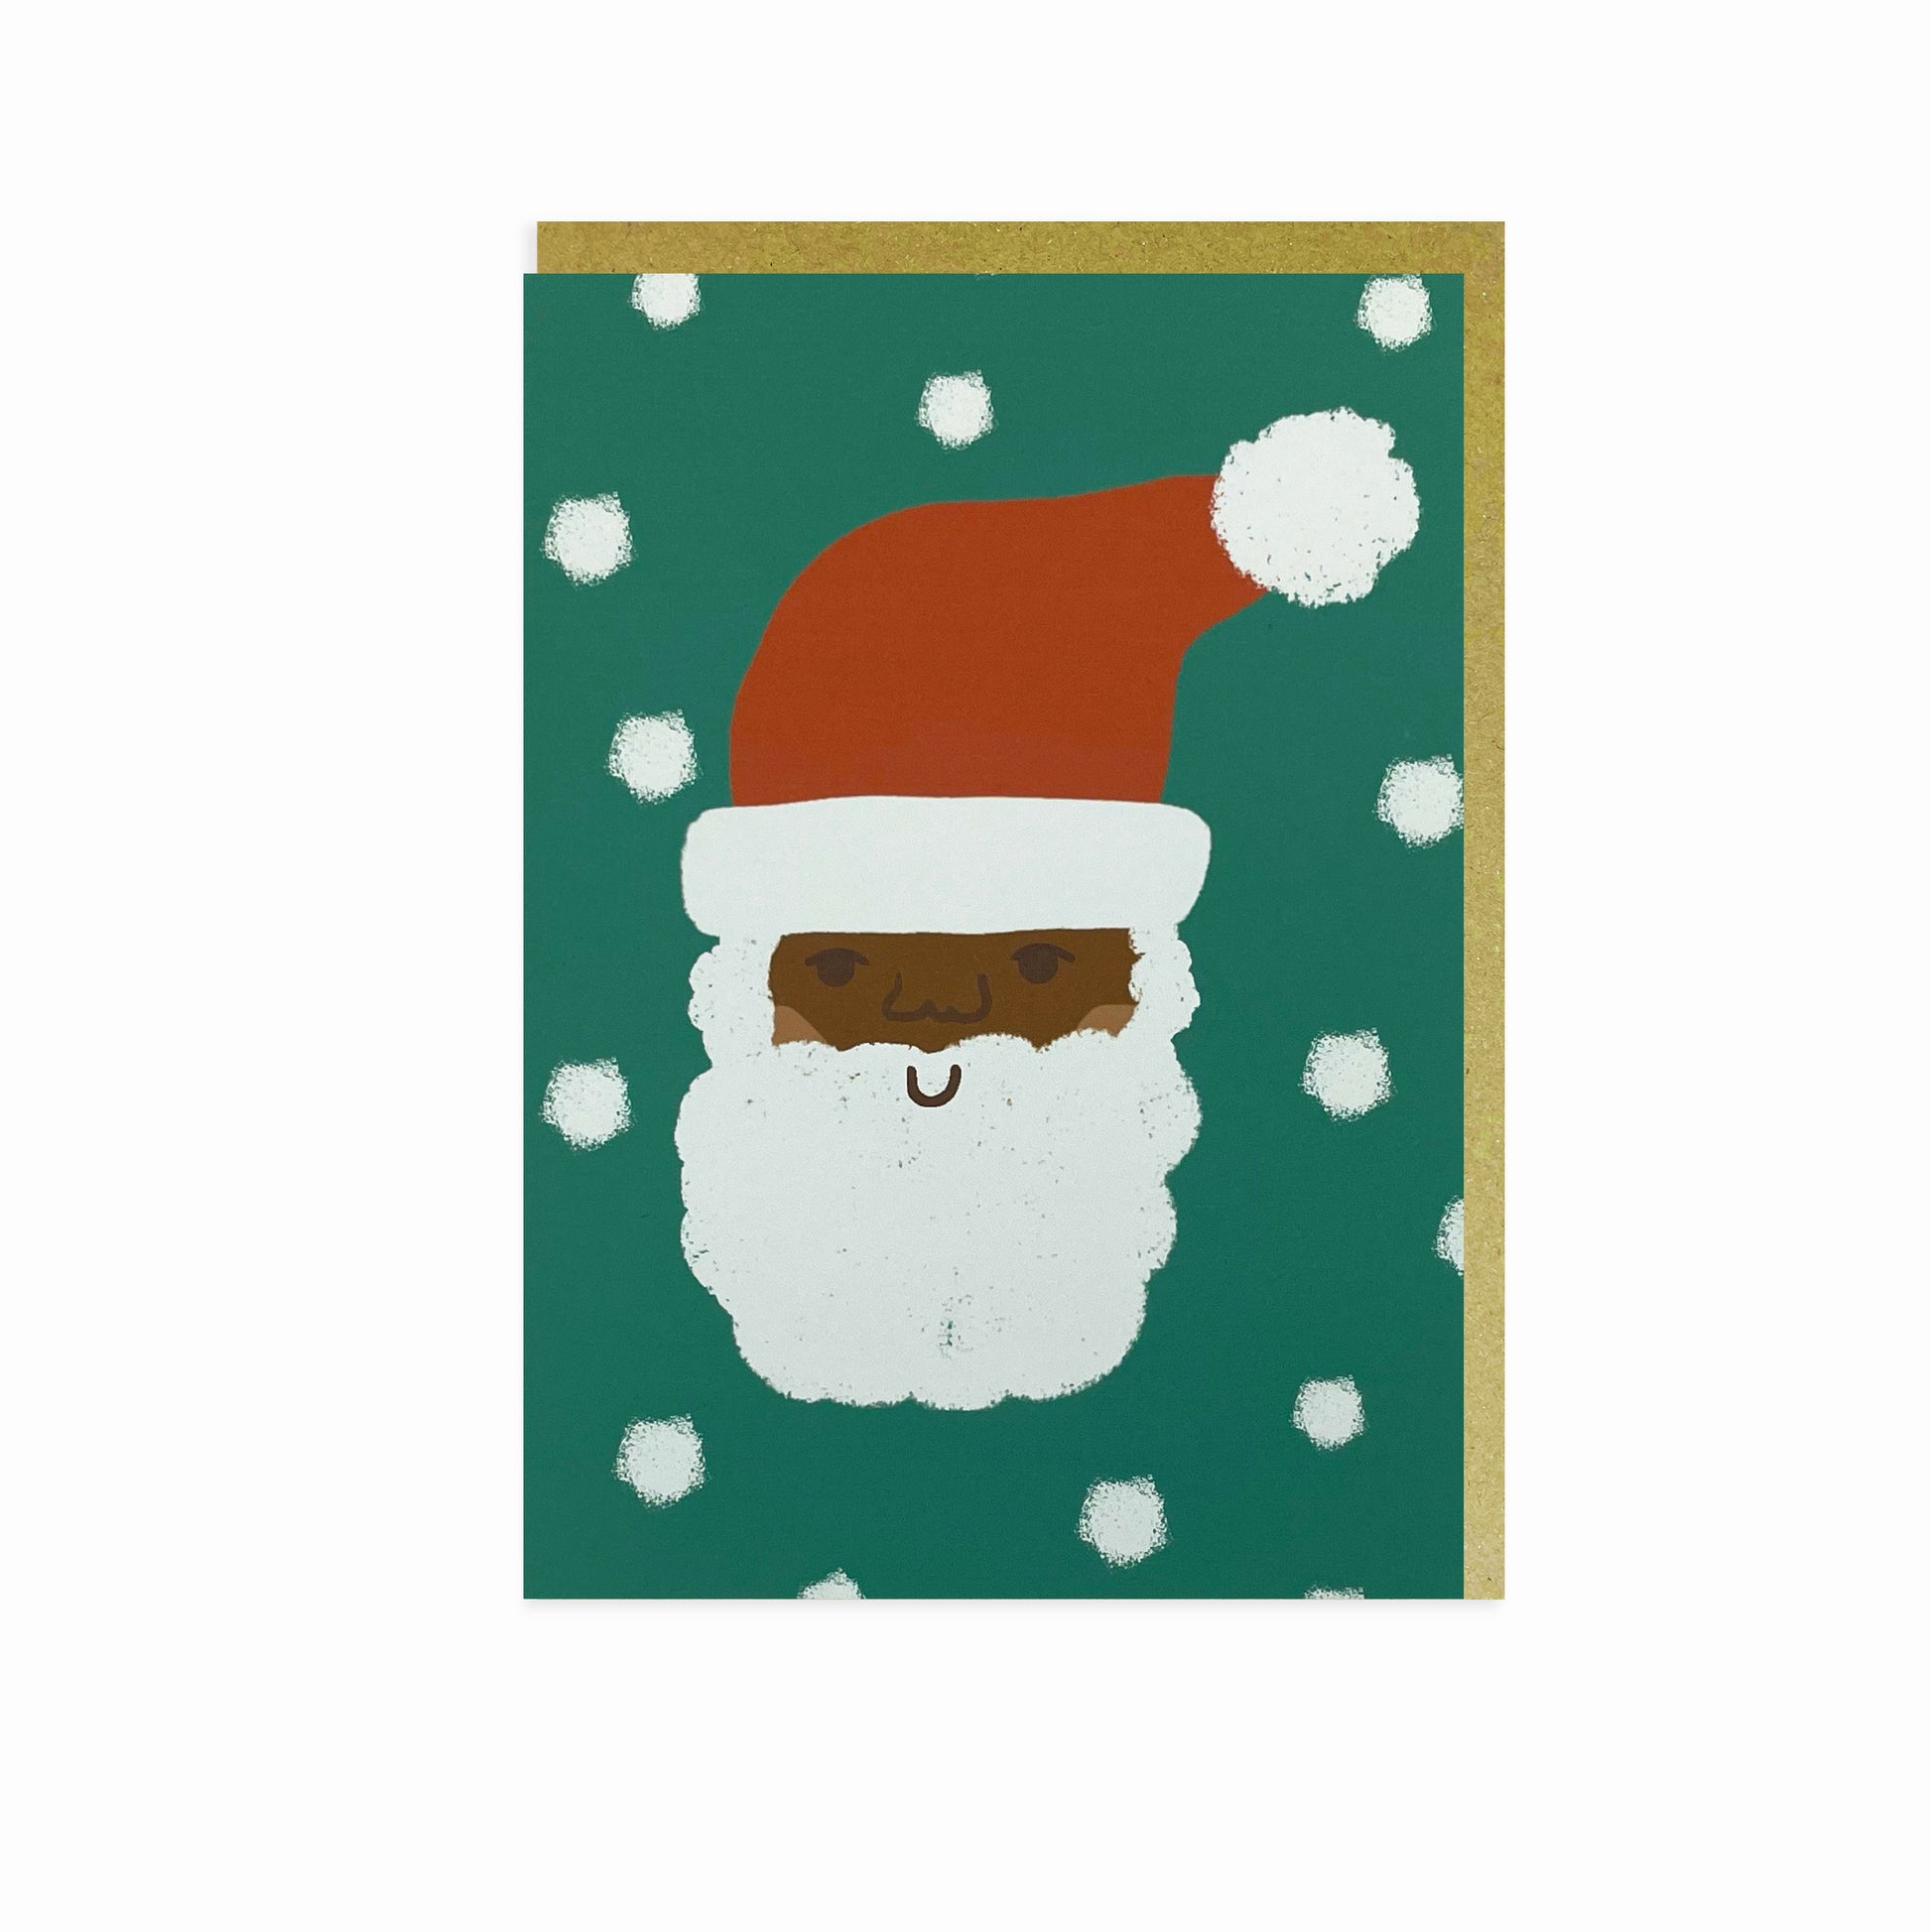 Black Santa Claus with snowflakes in the background. Black Christmas card.